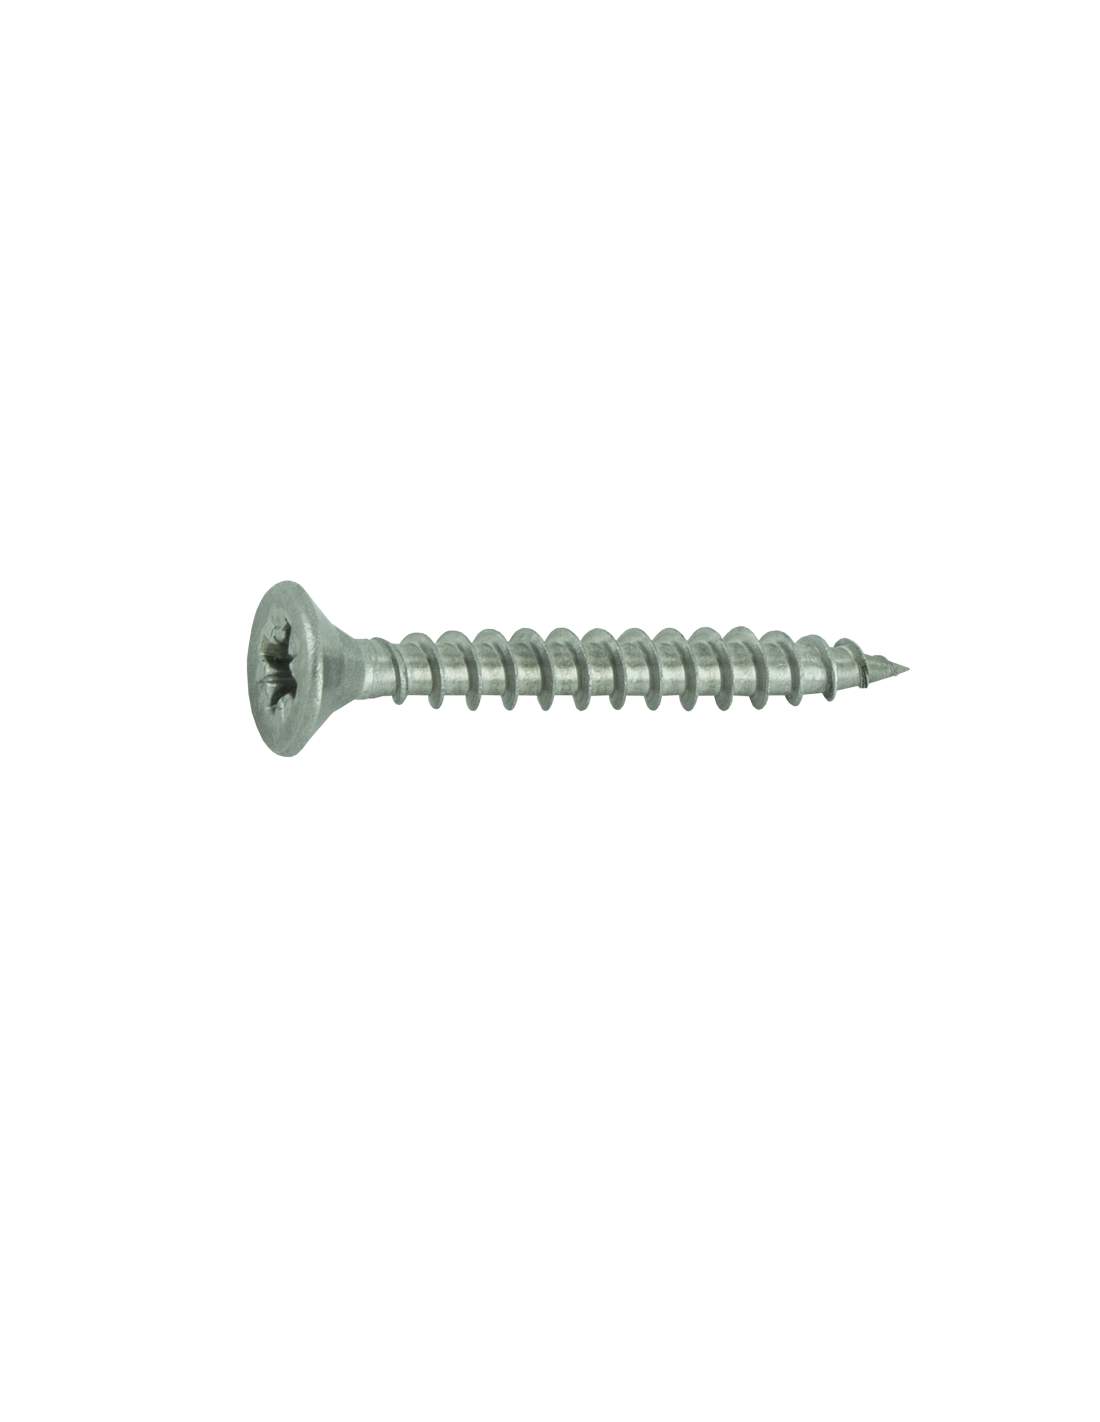 Agglo countersunk Pozidriv stainless steel screws A2 6x100, 4 pcs.